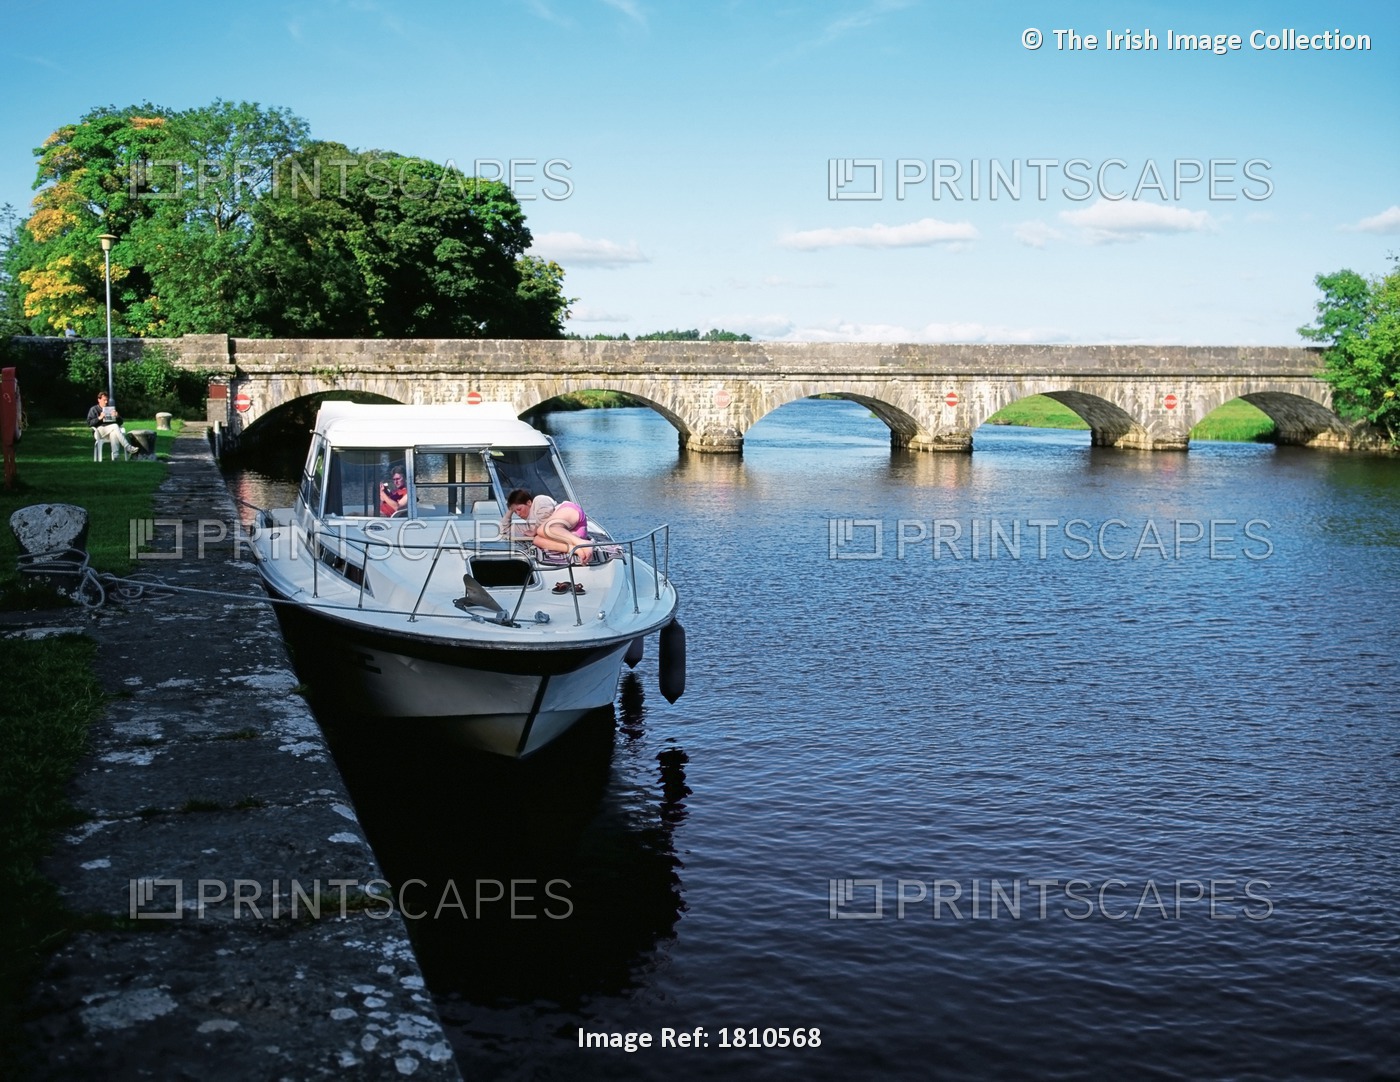 Drumsna, River Shannon, Co Leitrim, Ireland; Boat And Bridge On A River